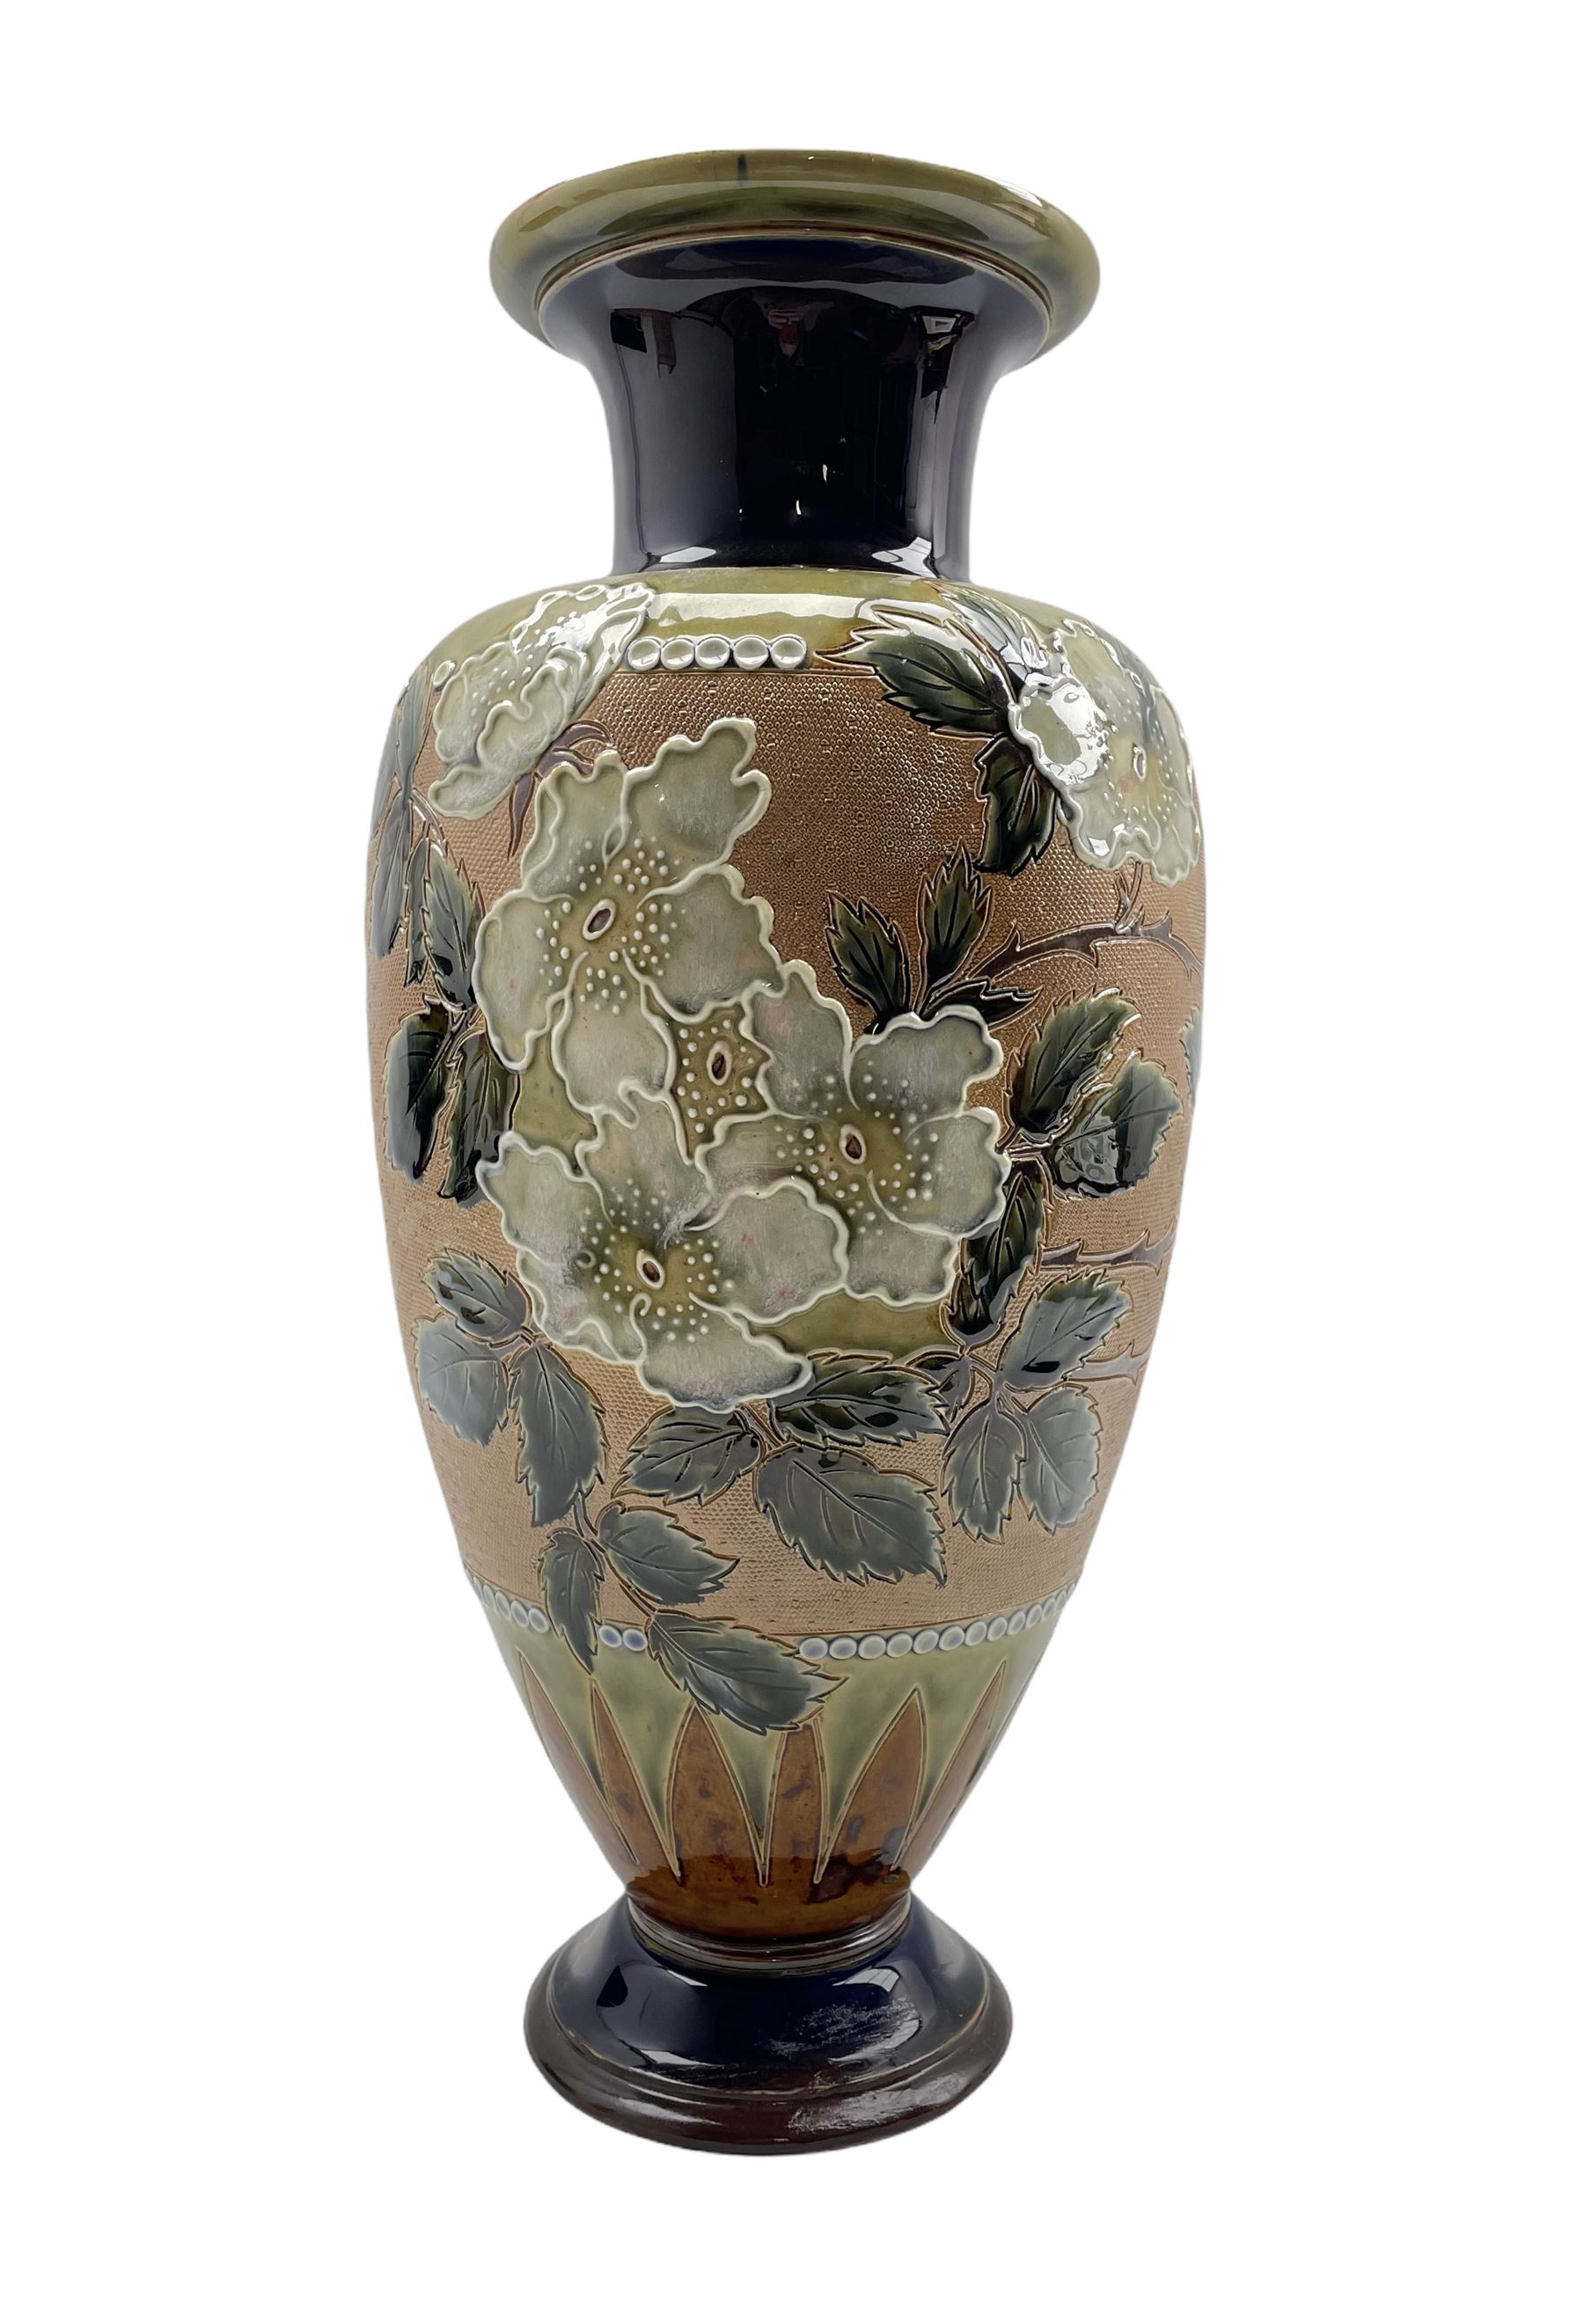 Large Doulton Slater stoneware vase applied with floral decoration on chine ground